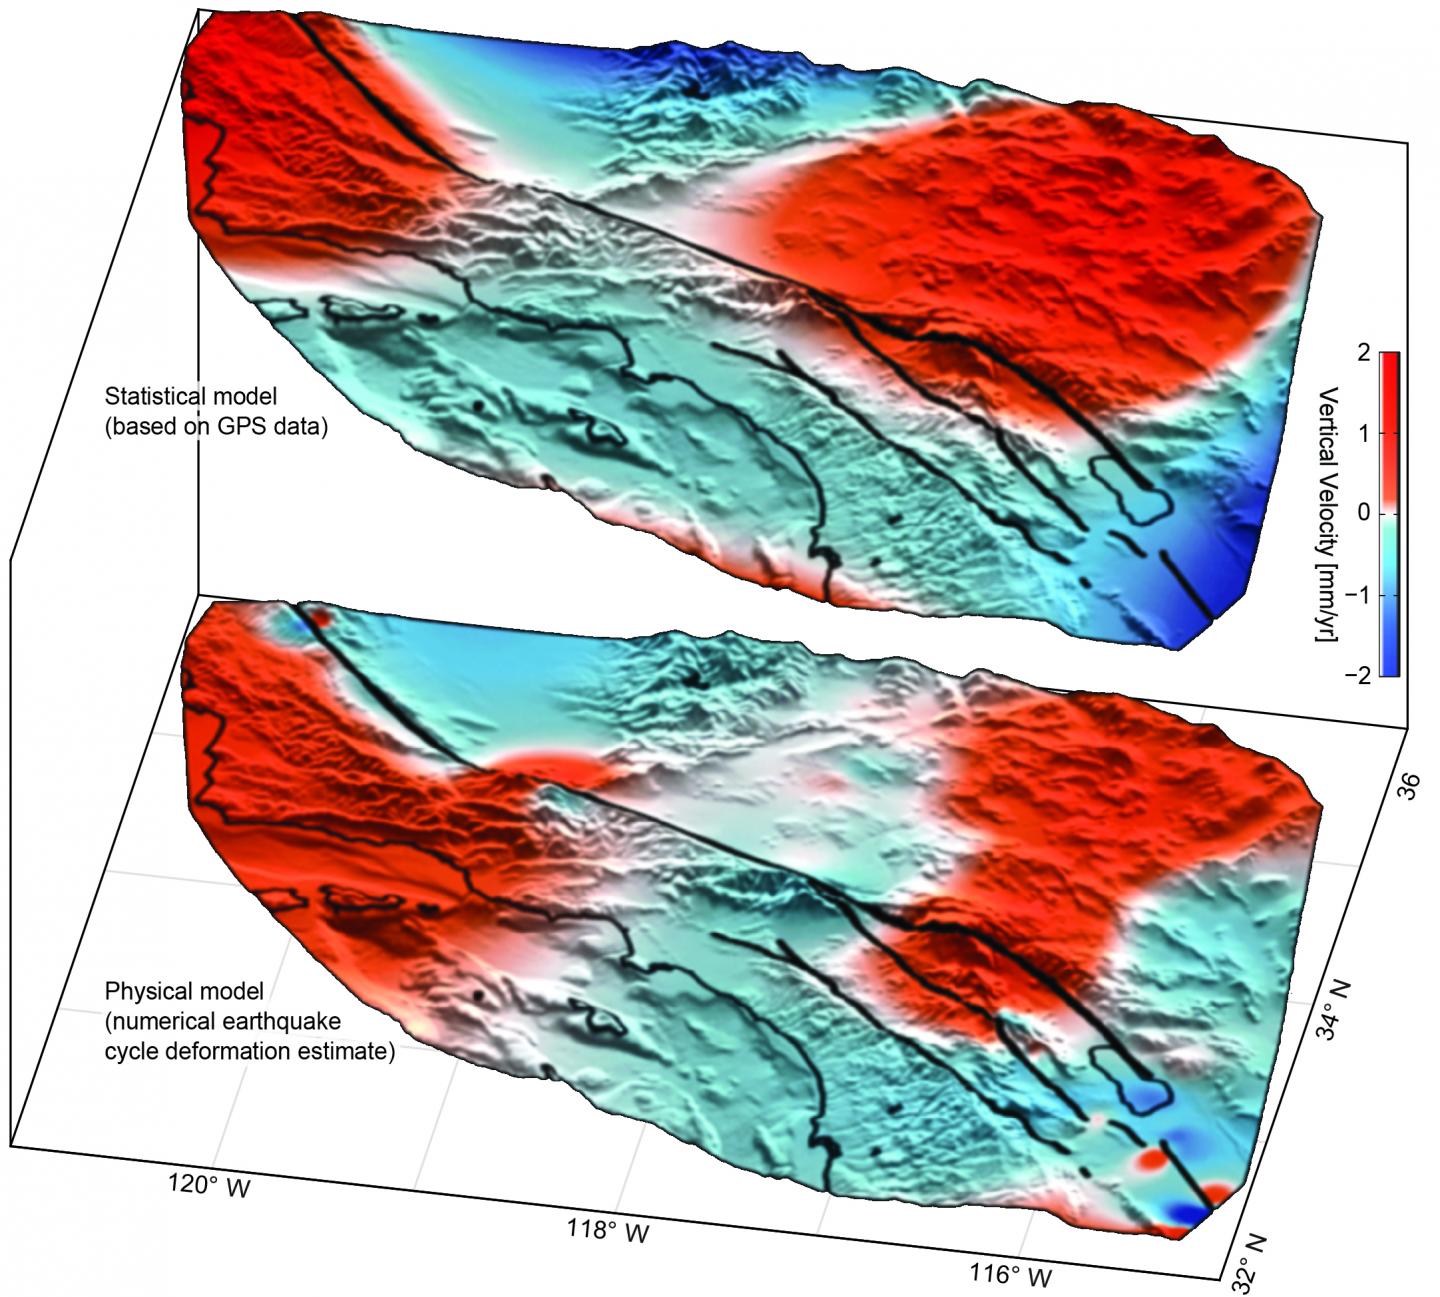 Uplift and Subsidence Map around San Andreas Fault System